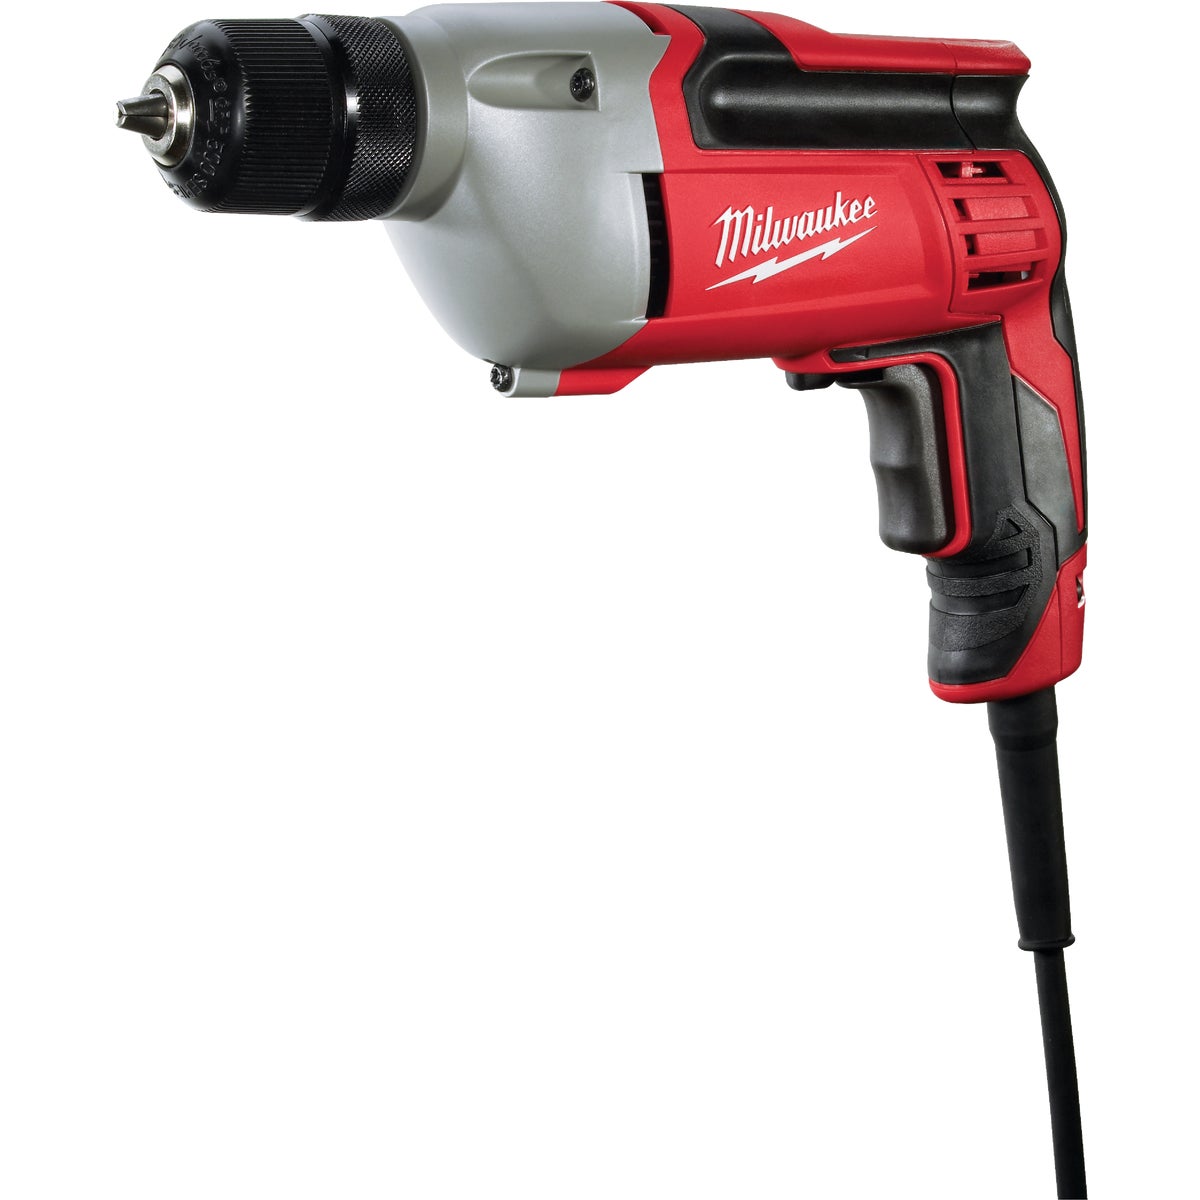 3/8″ CORDED DRILL